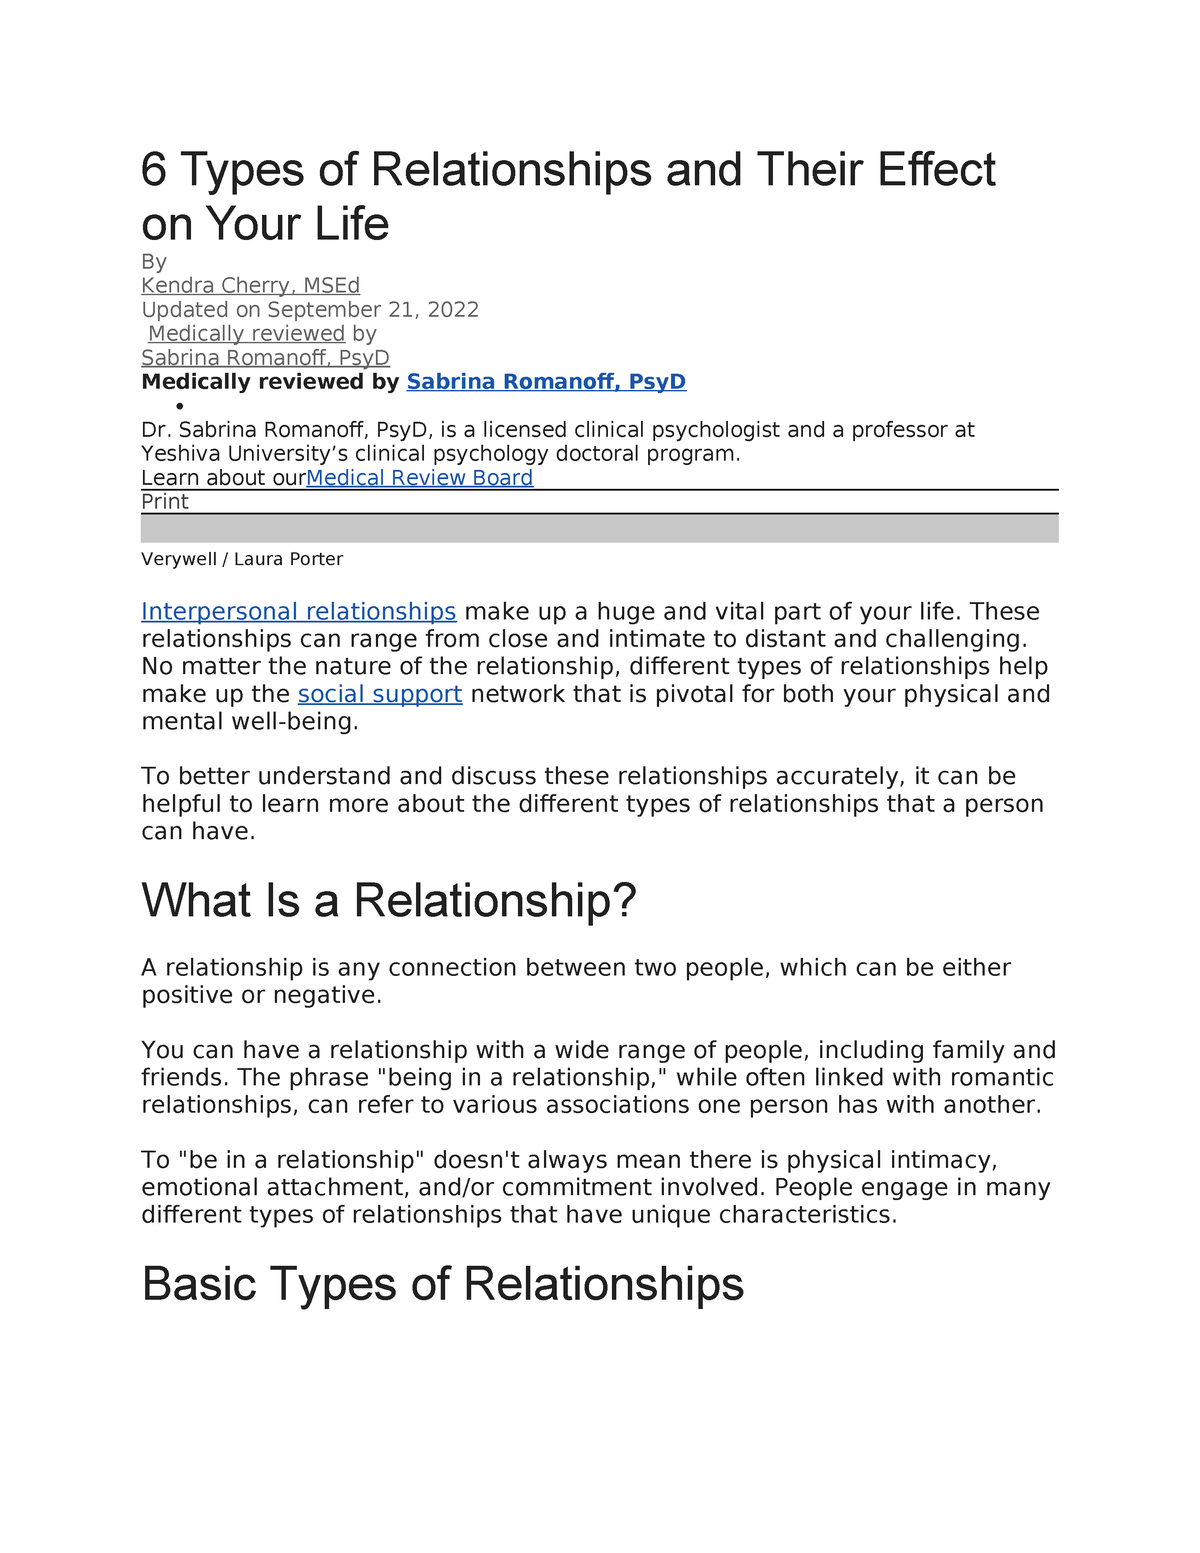 6 Types of Relationships and Their Effect on Your Life